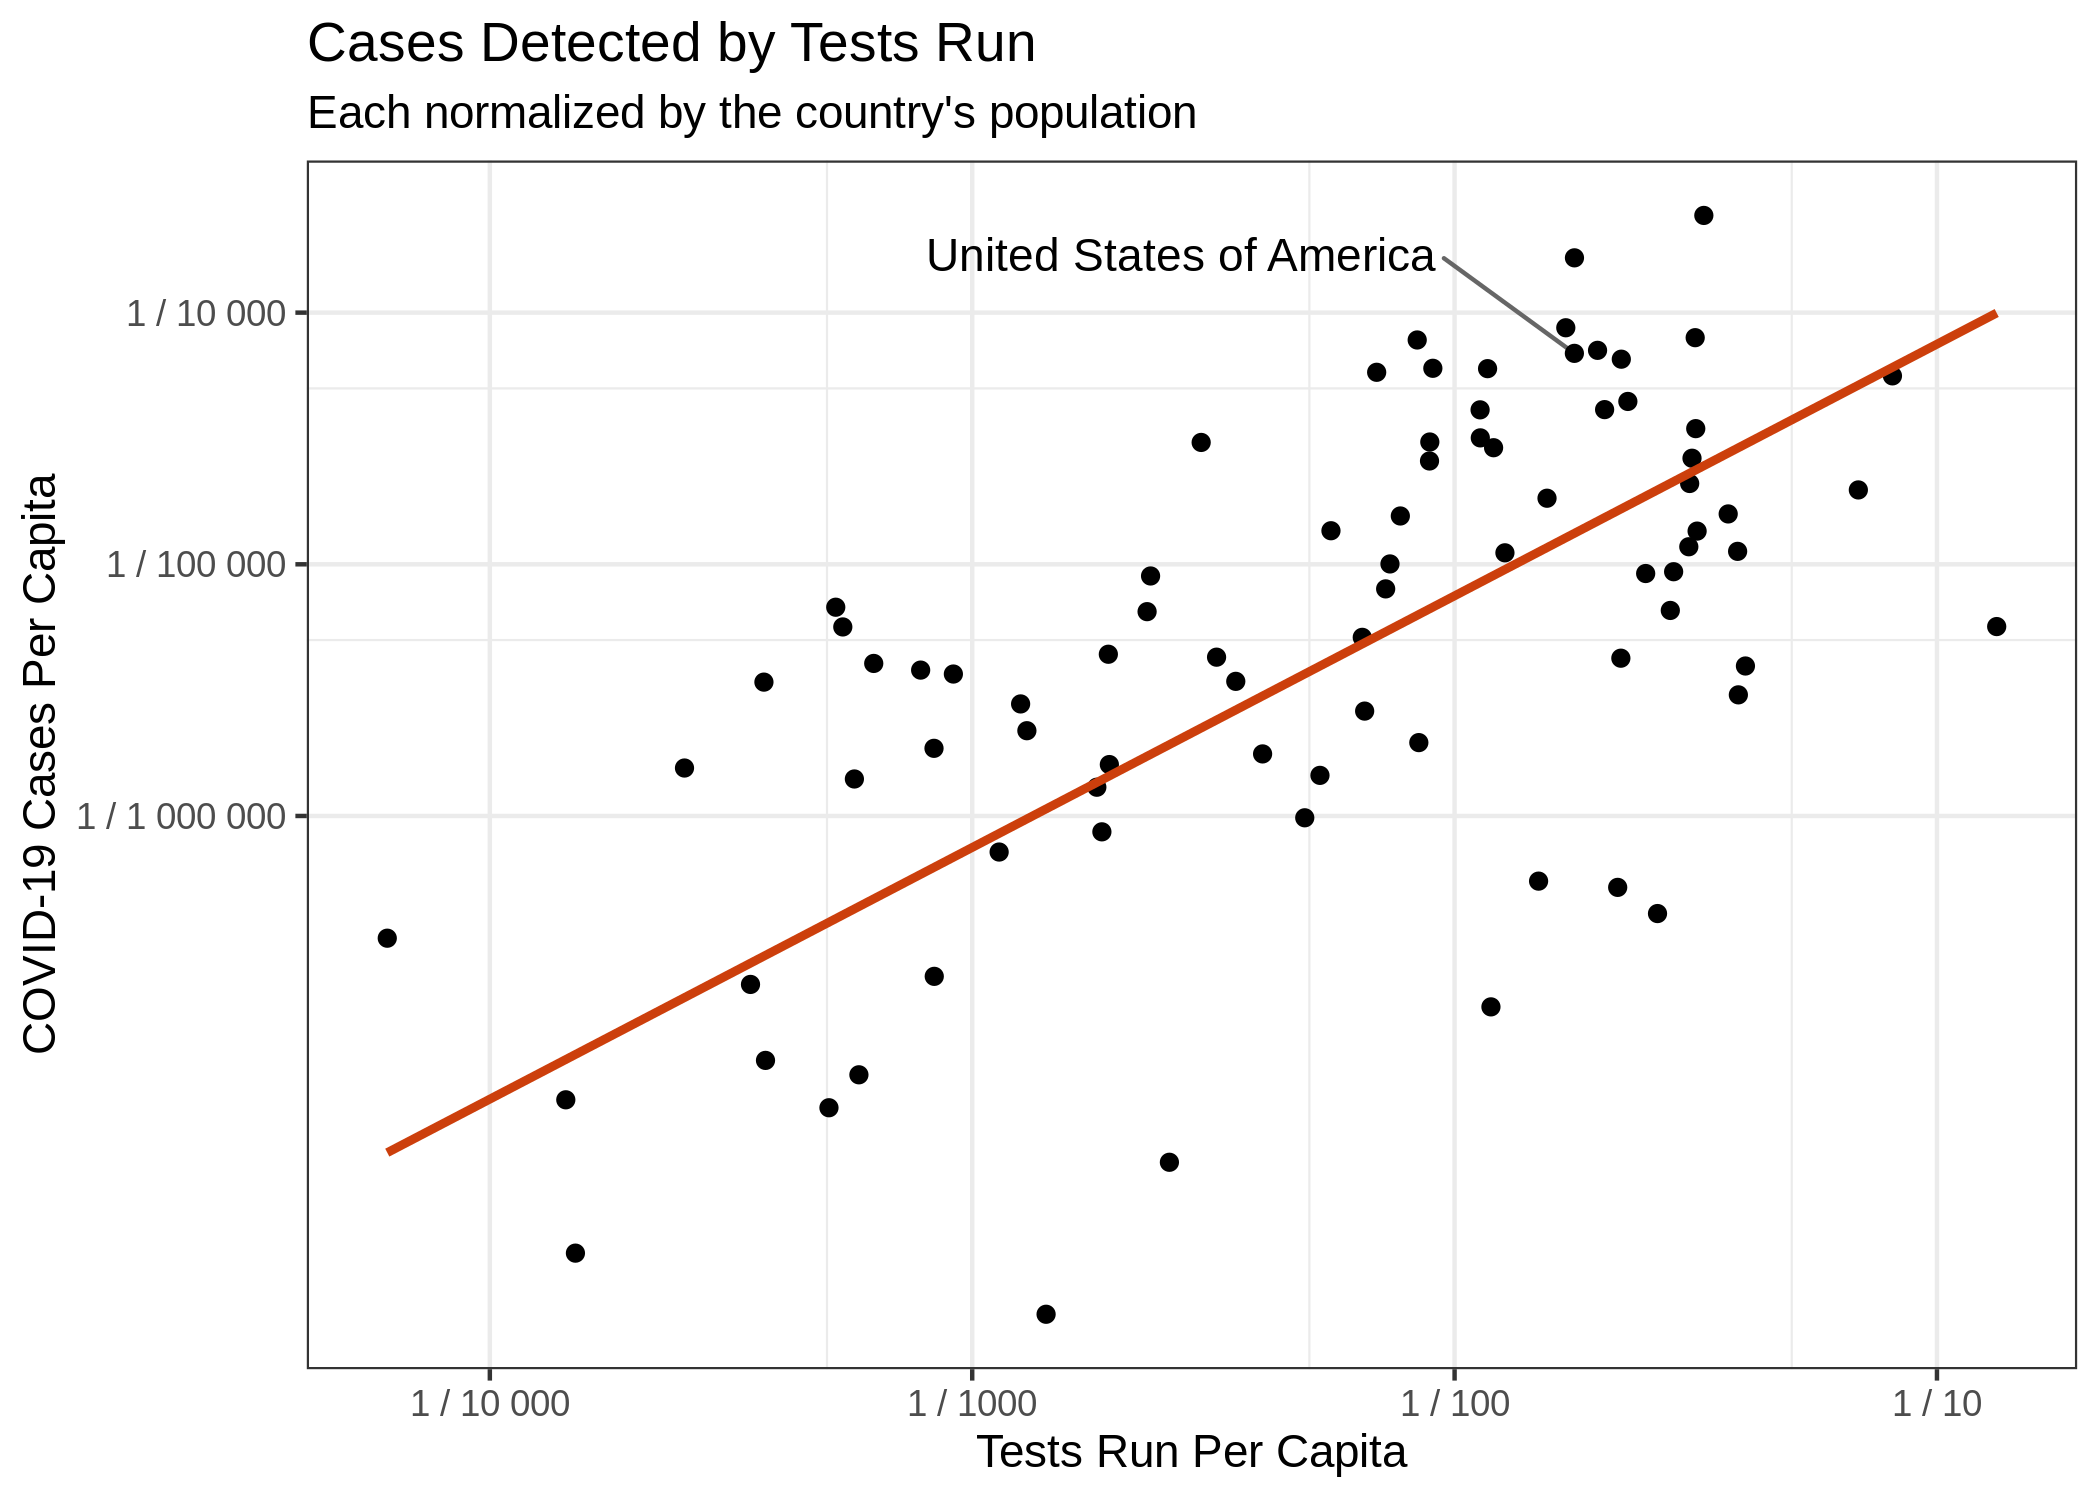 A plot relating testing to number of cases